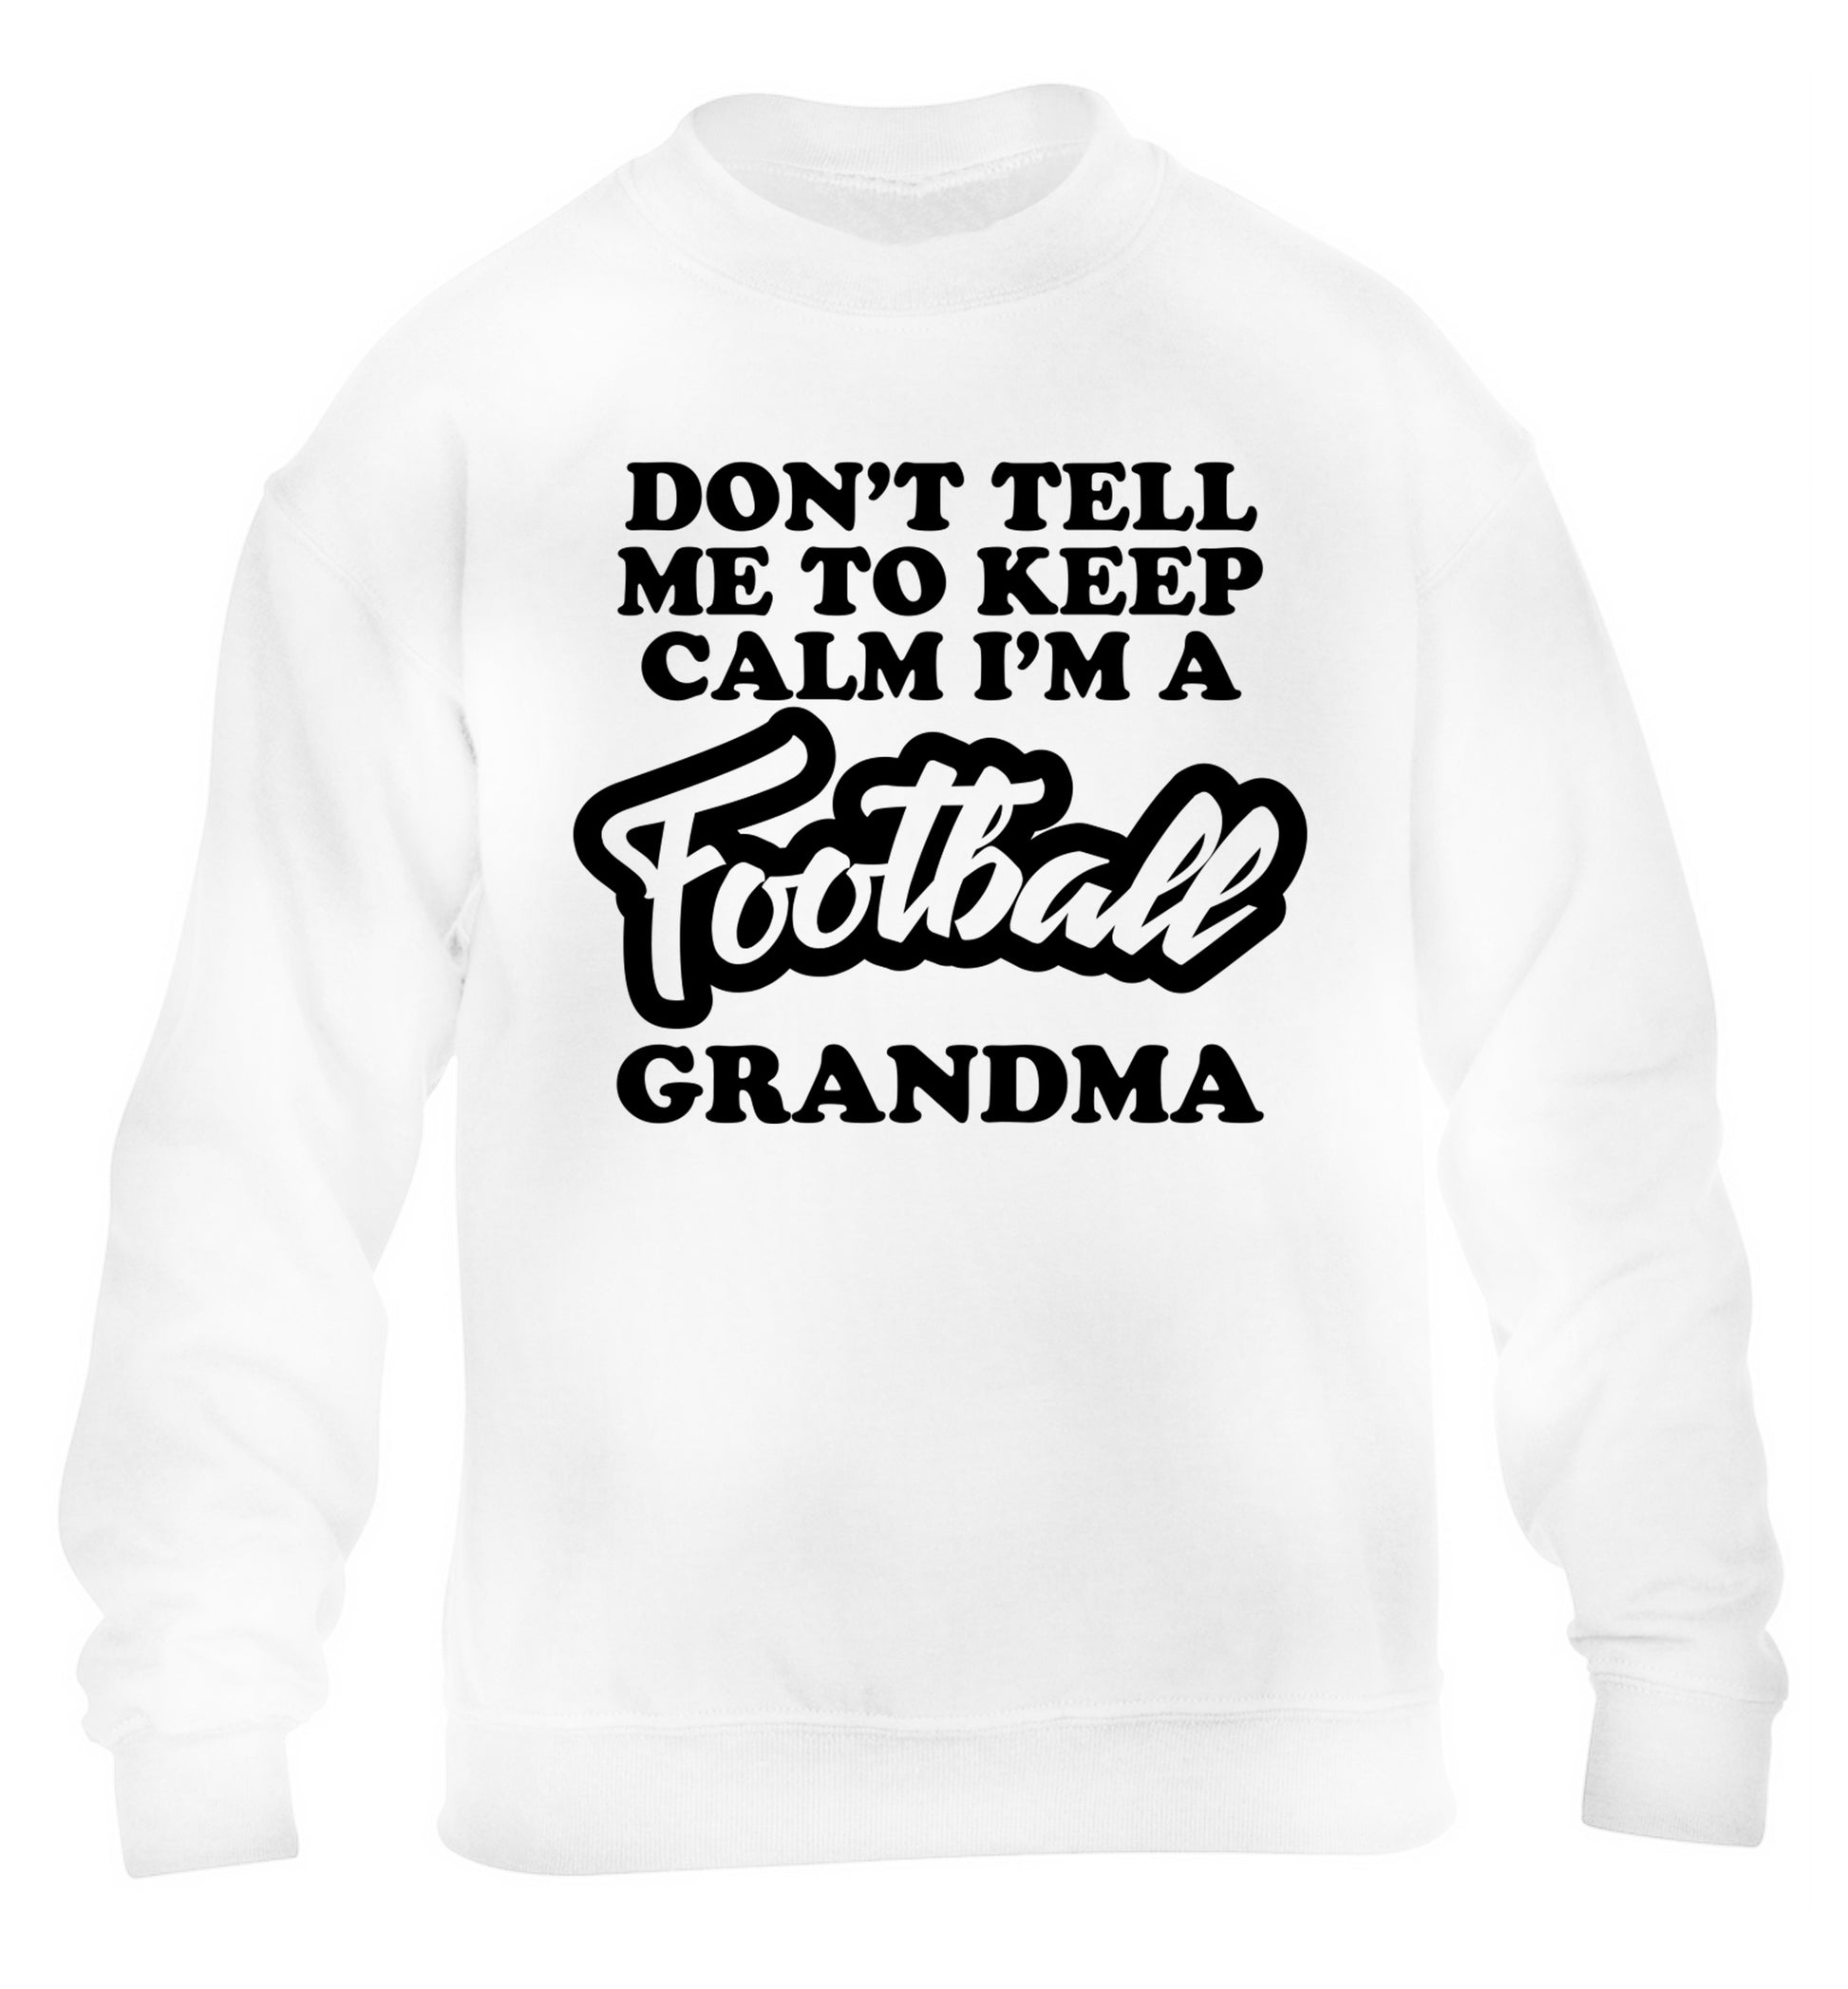 Don't tell me to keep calm I'm a football grandma children's white sweater 12-14 Years